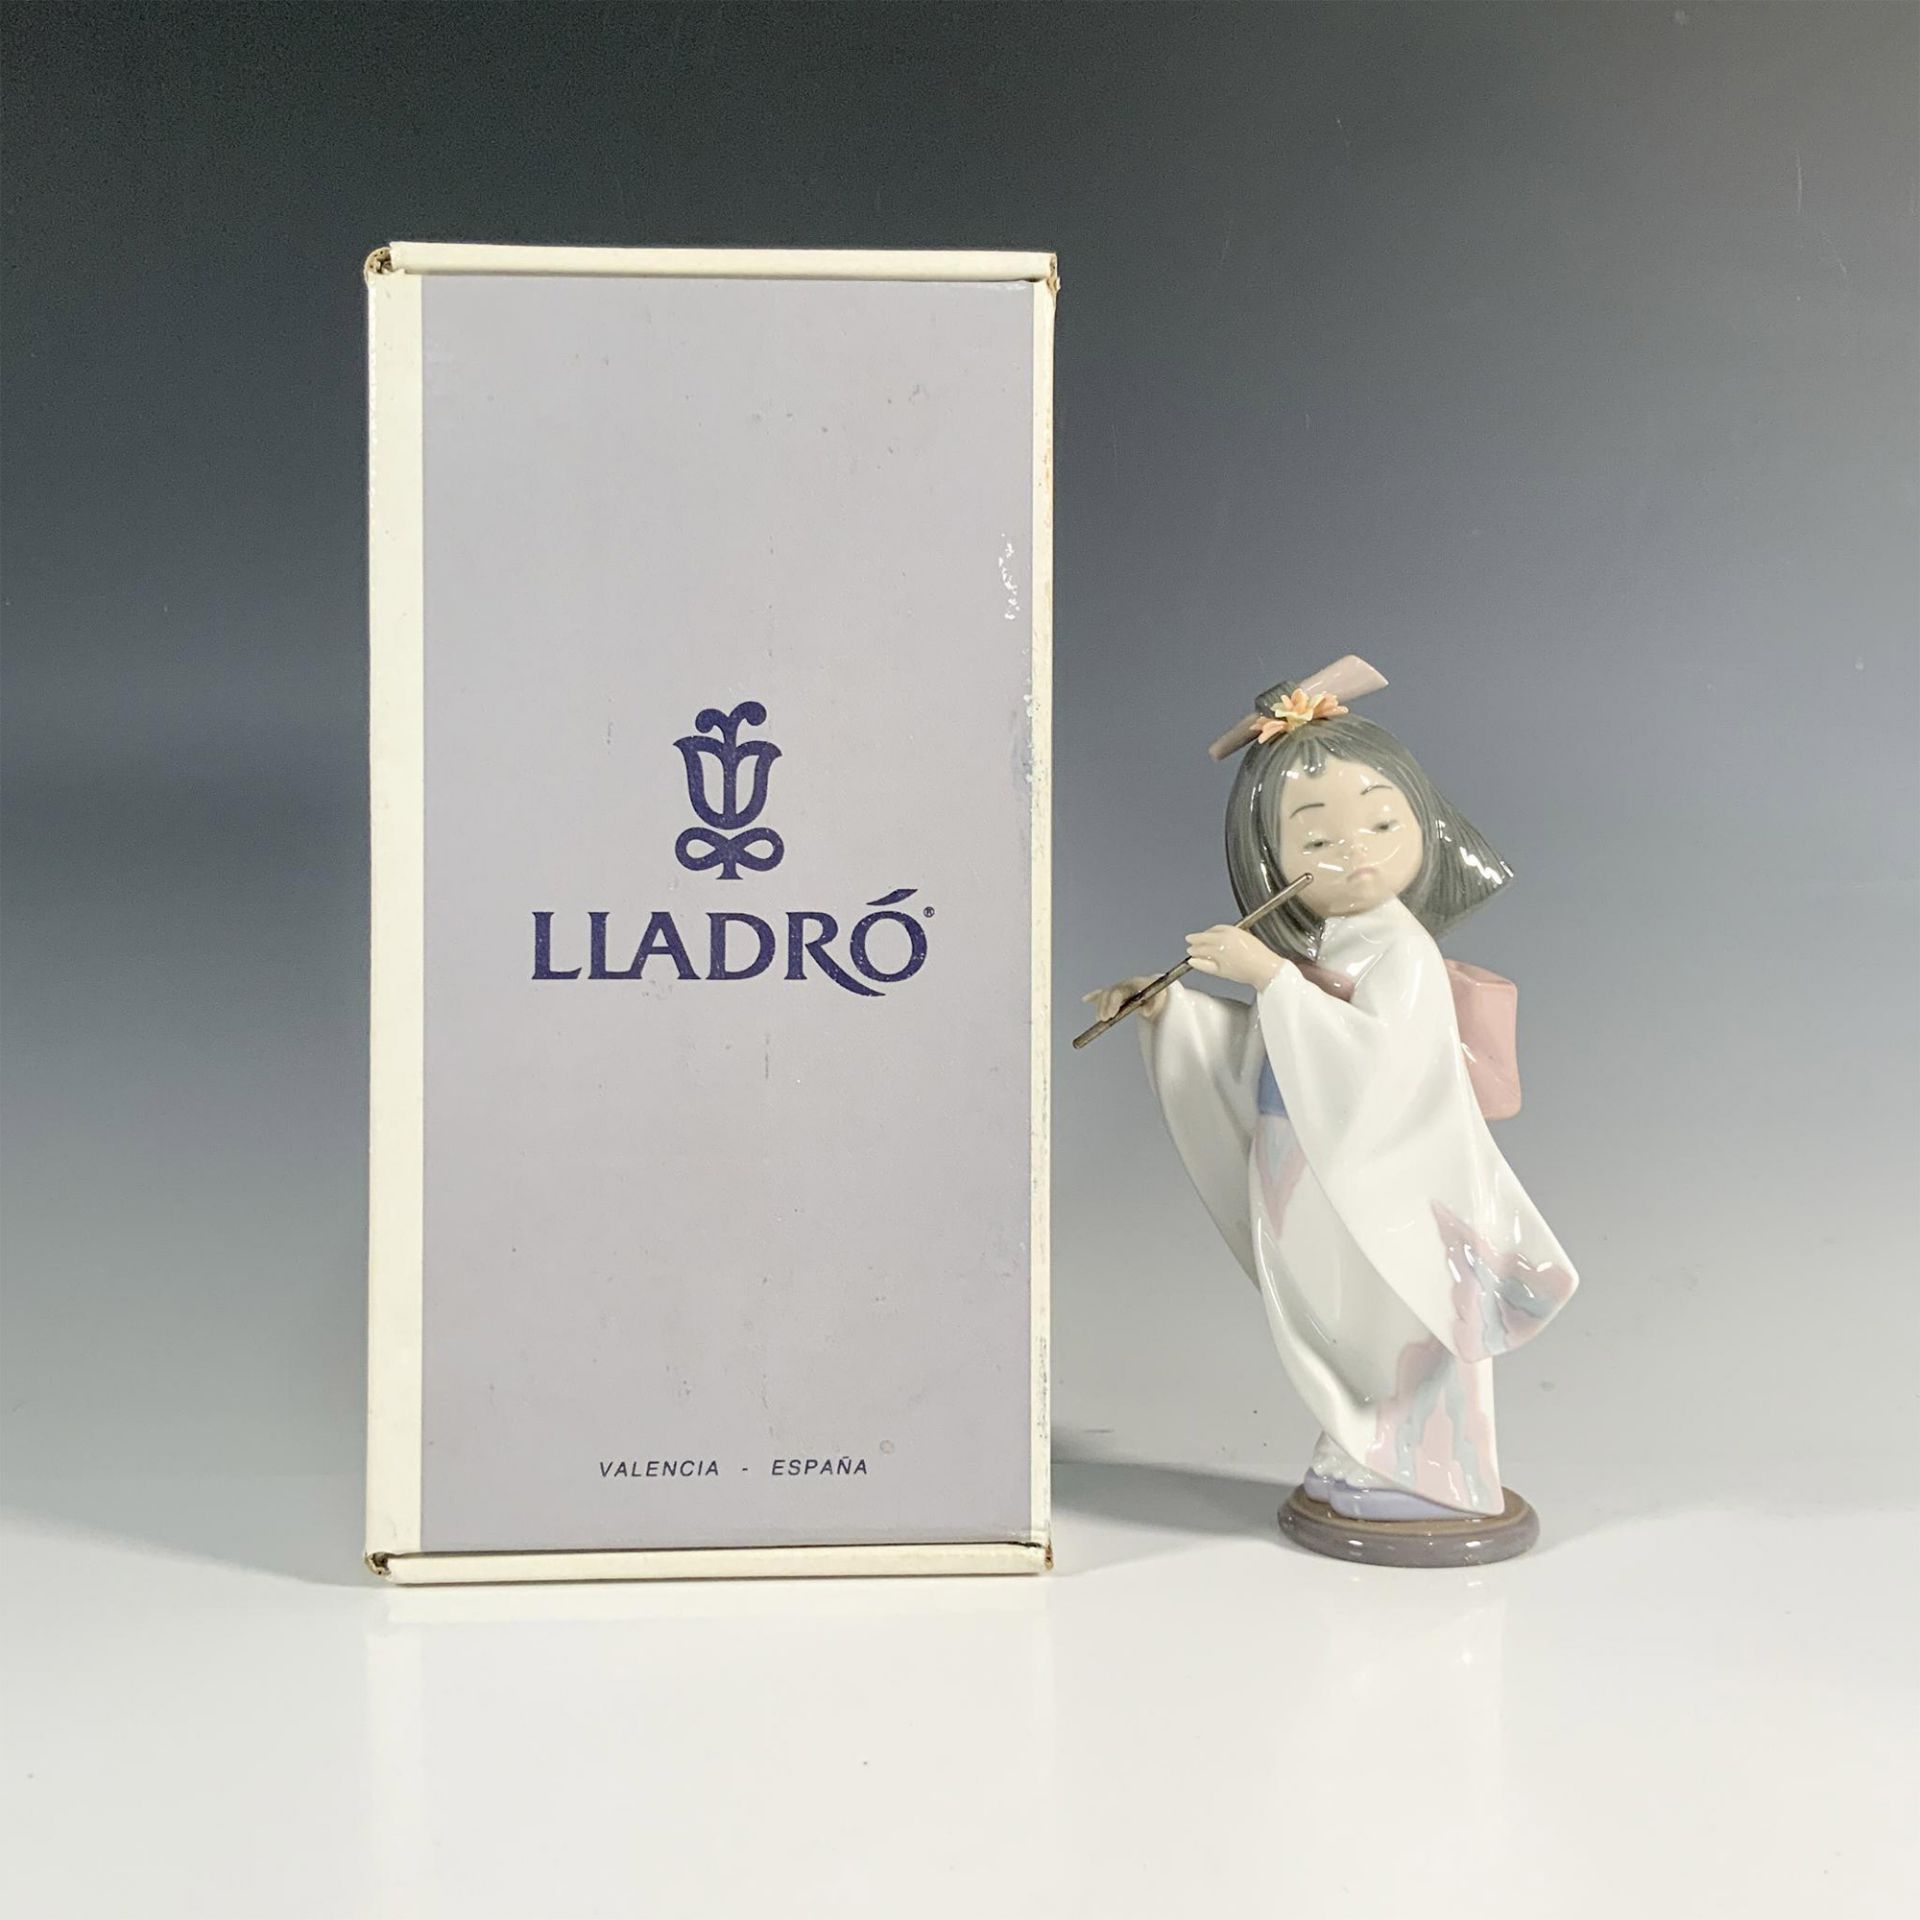 Playing The Flute 1006150 - Lladro Porcelain Figurine - Image 4 of 4